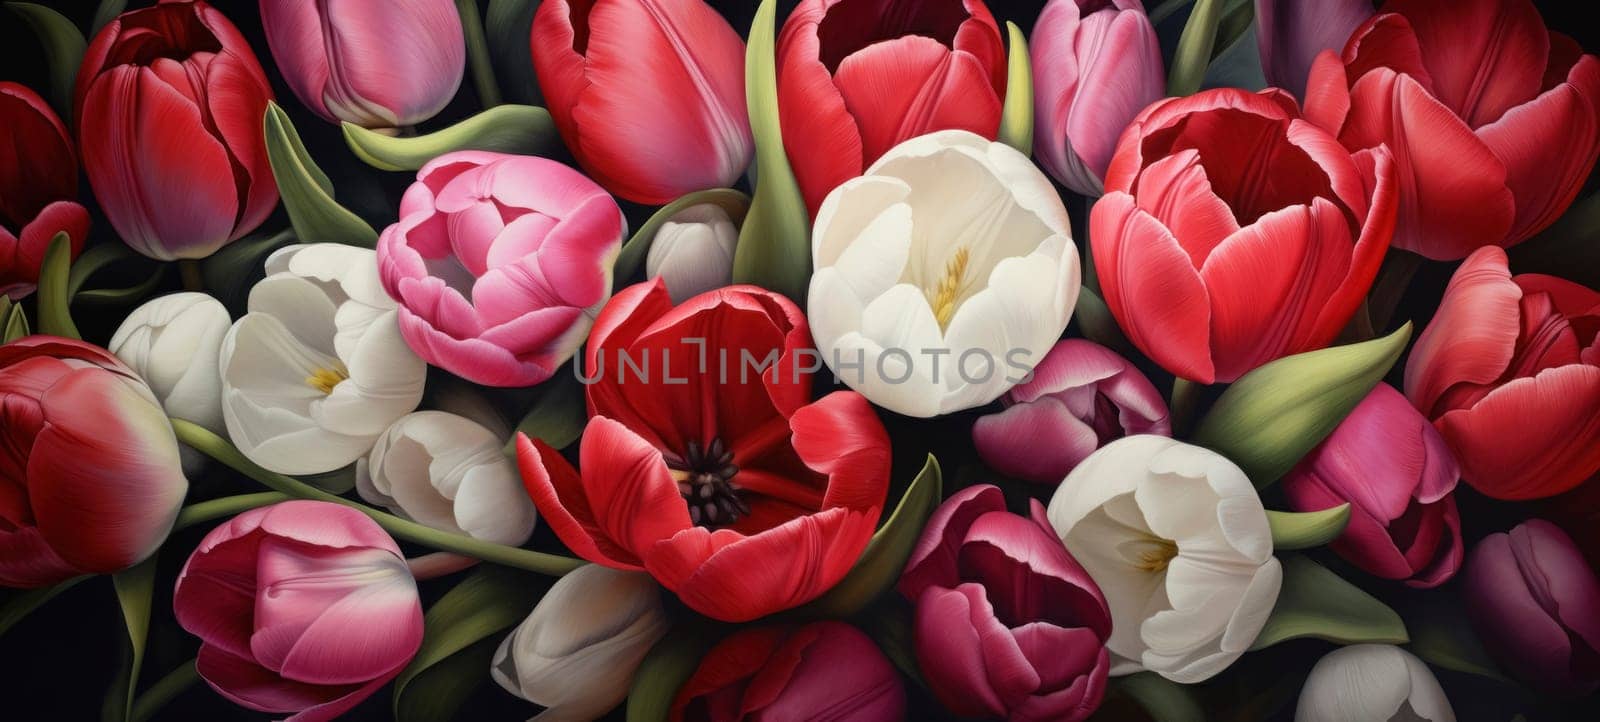 A stunning array of red, pink, and white tulips in full bloom, creating a beautiful and vibrant floral display.